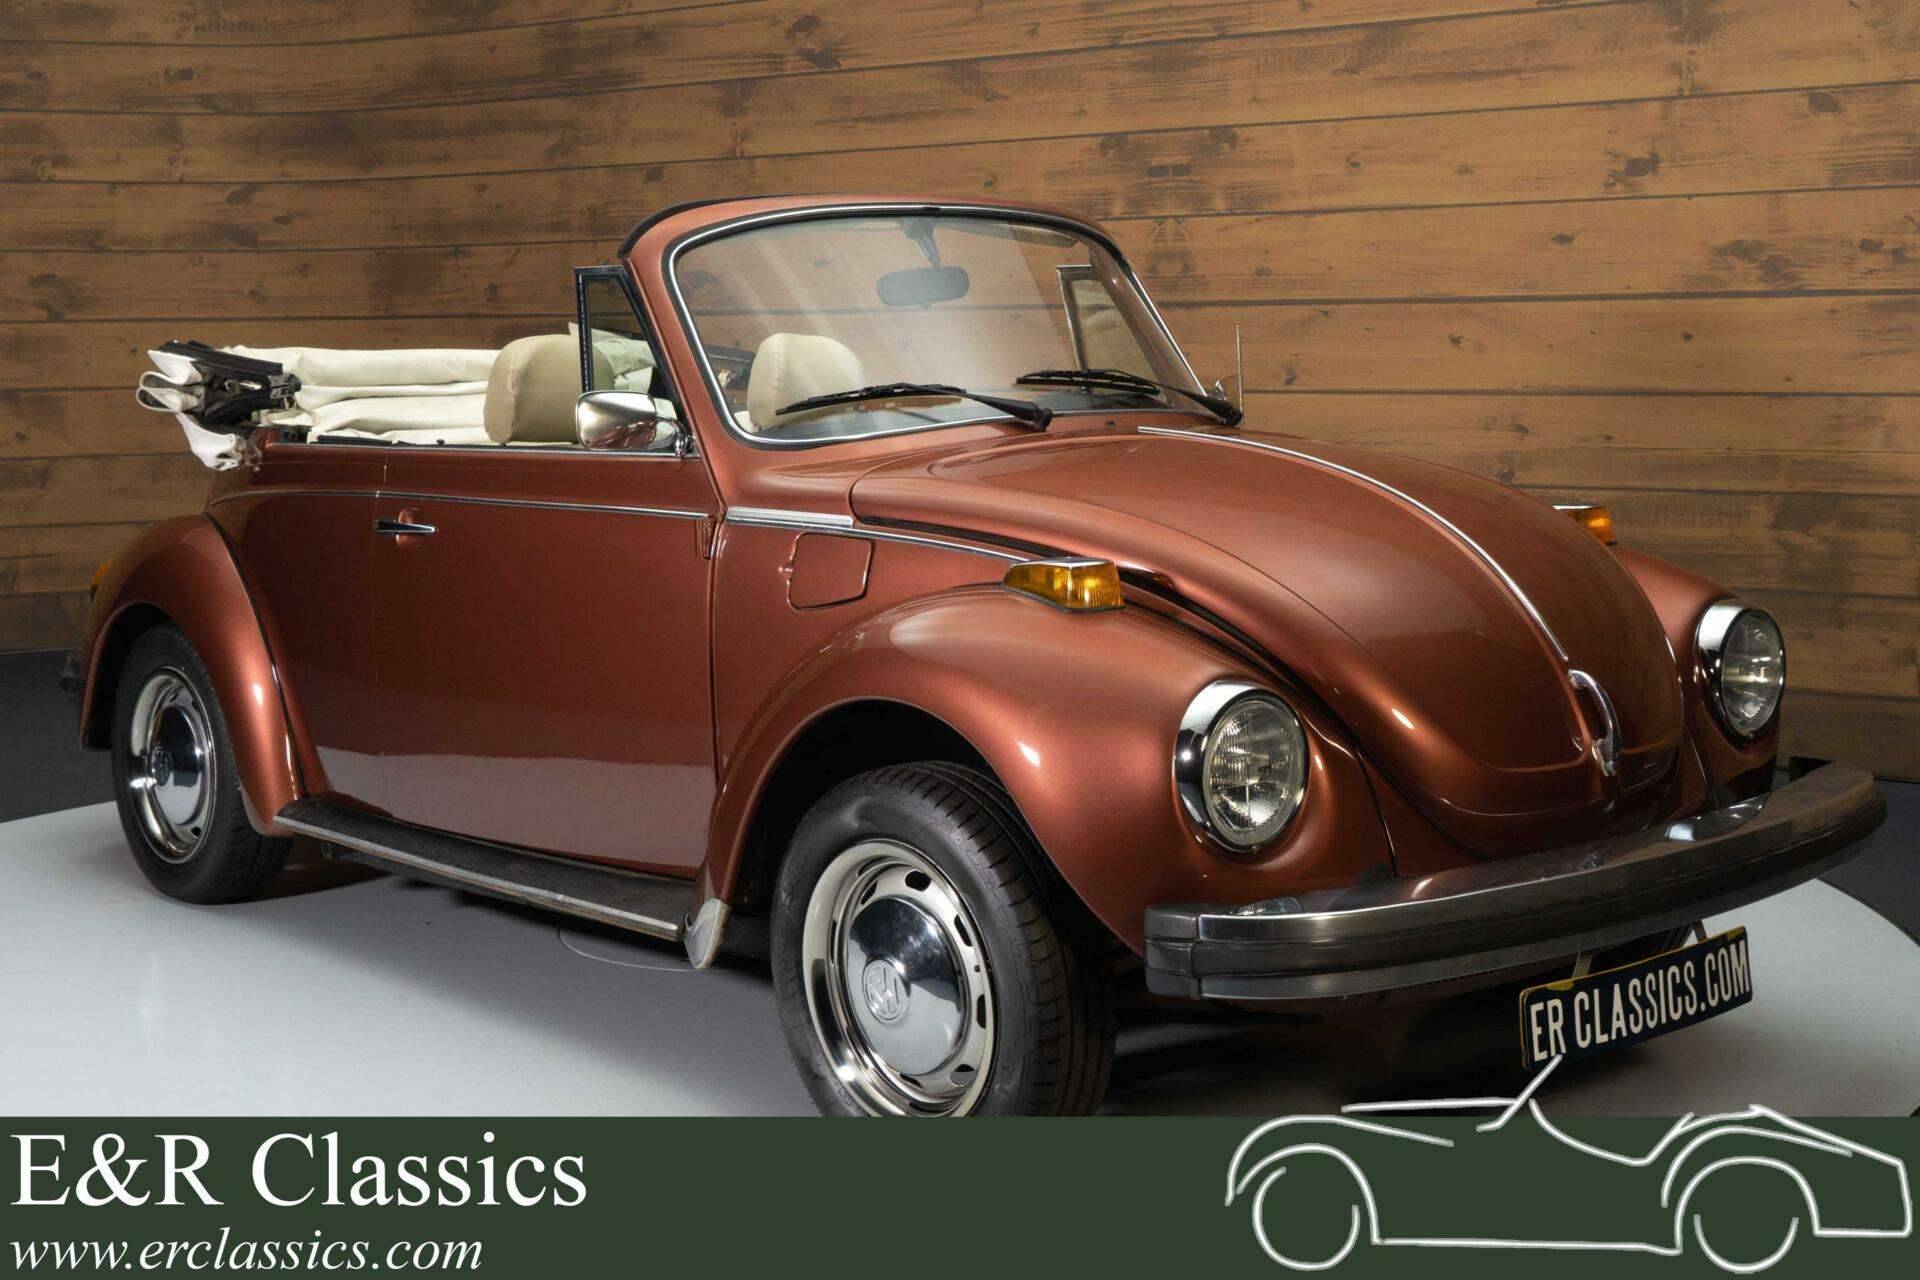 For Sale: Volkswagen Käfer 1303 Champagne Edition (1978) offered for  €29,950